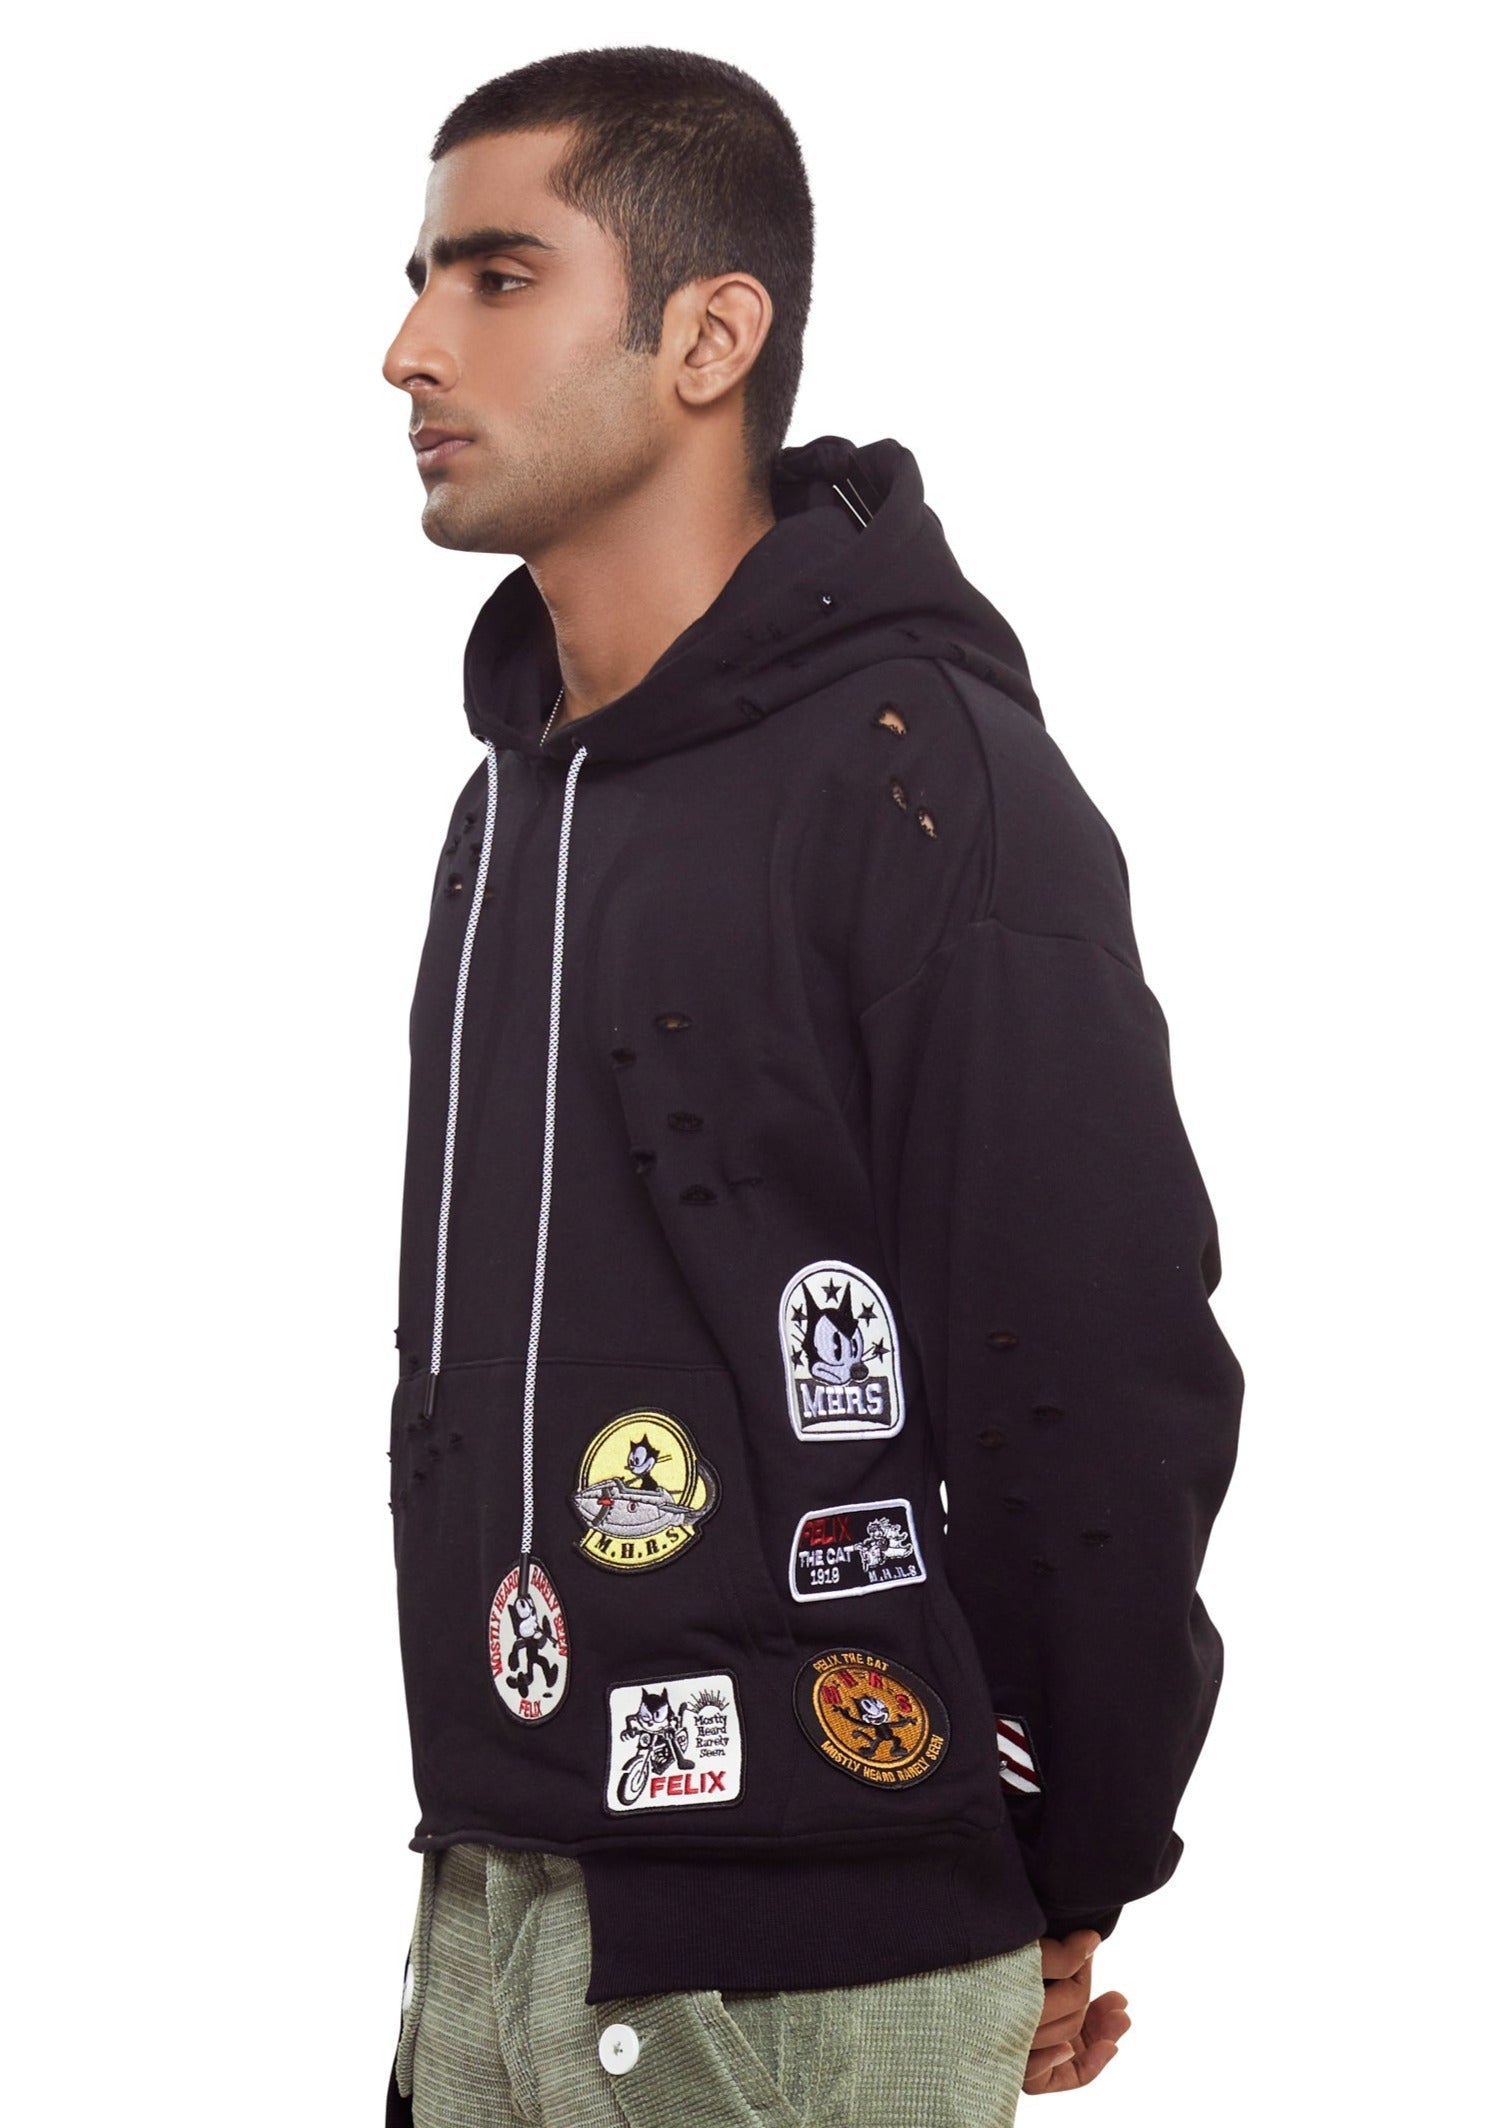 Black cotton drop shoulder hoodie with logo patch to the front, punched holes, asymmetric hem and drawstrings with long sleeves and fitted-cuff sleeves from the brand Mostly Heard Rarely Seen